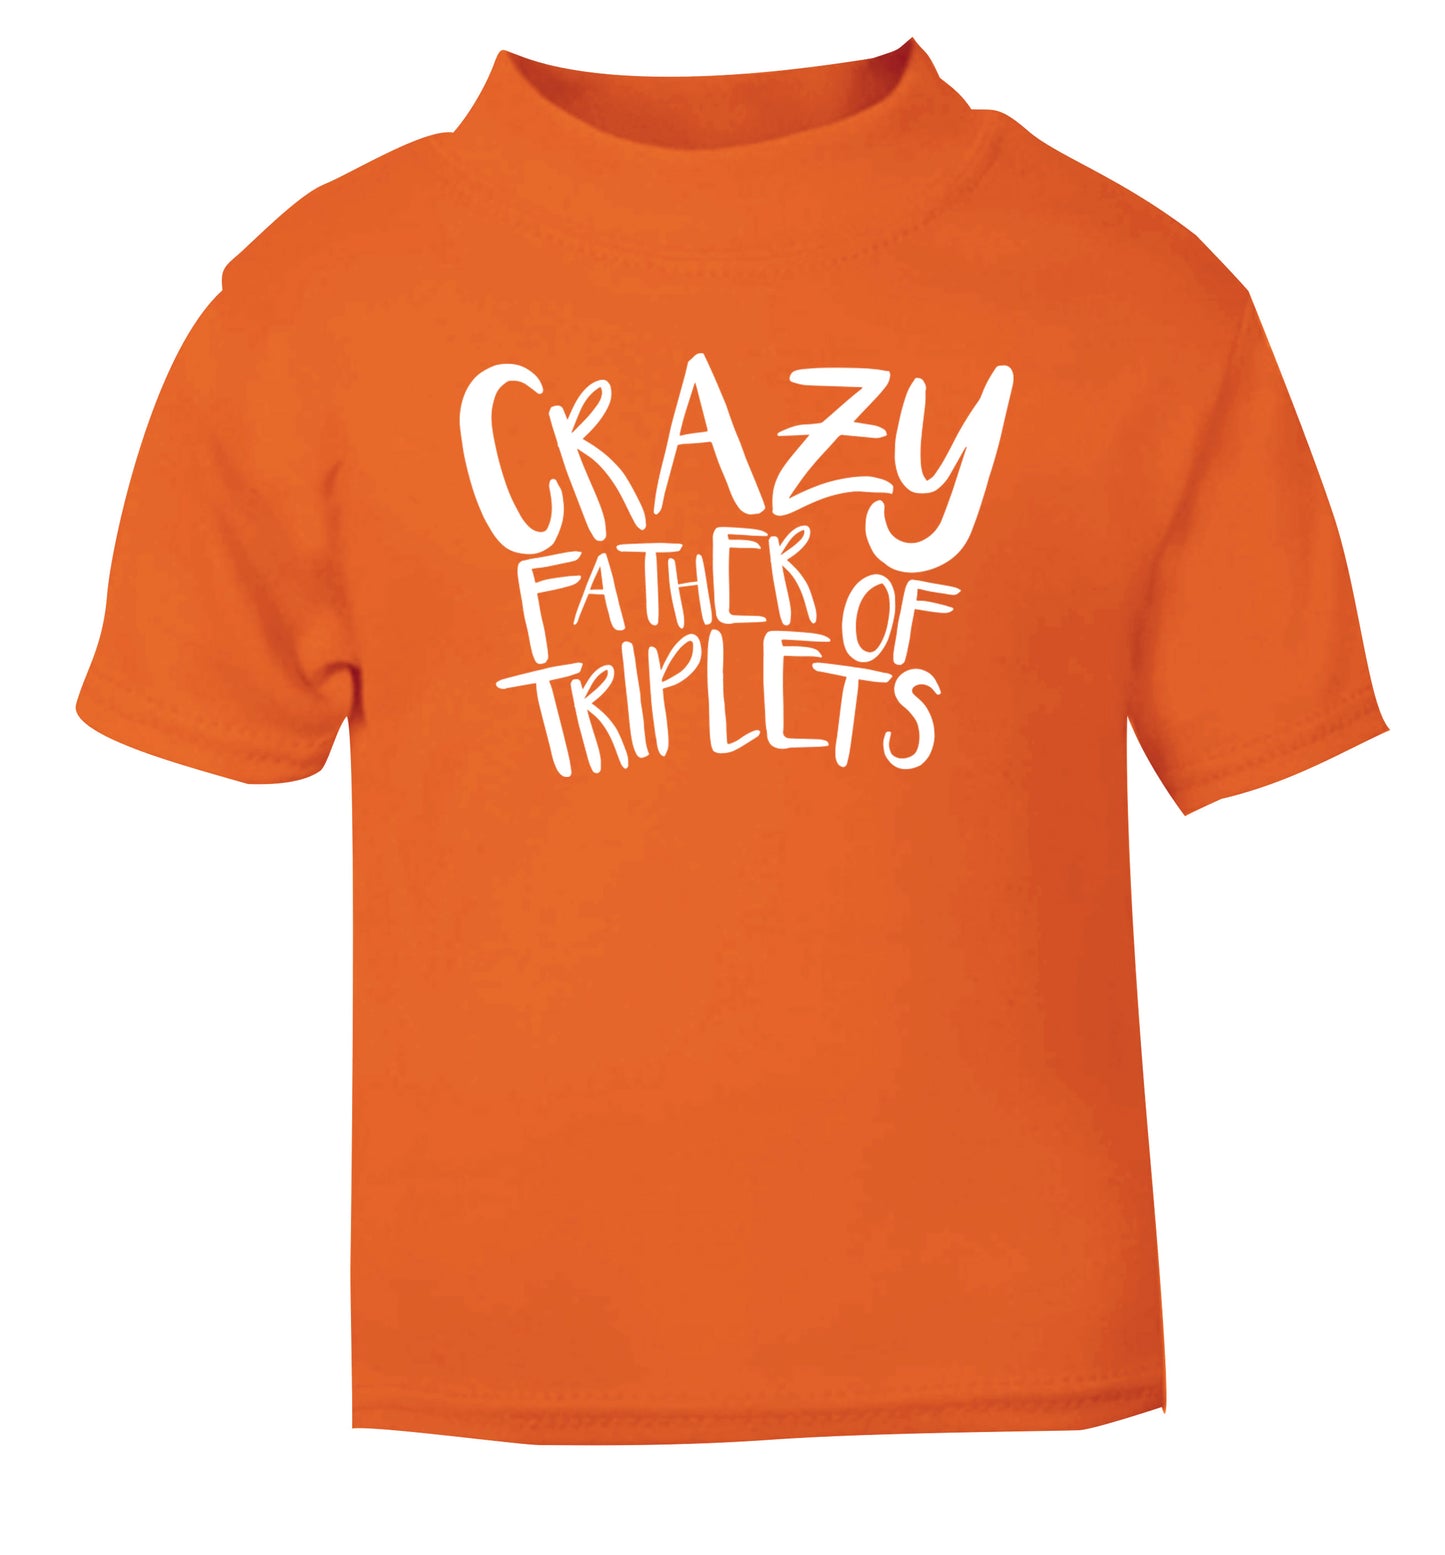 Crazy father of triplets orange Baby Toddler Tshirt 2 Years